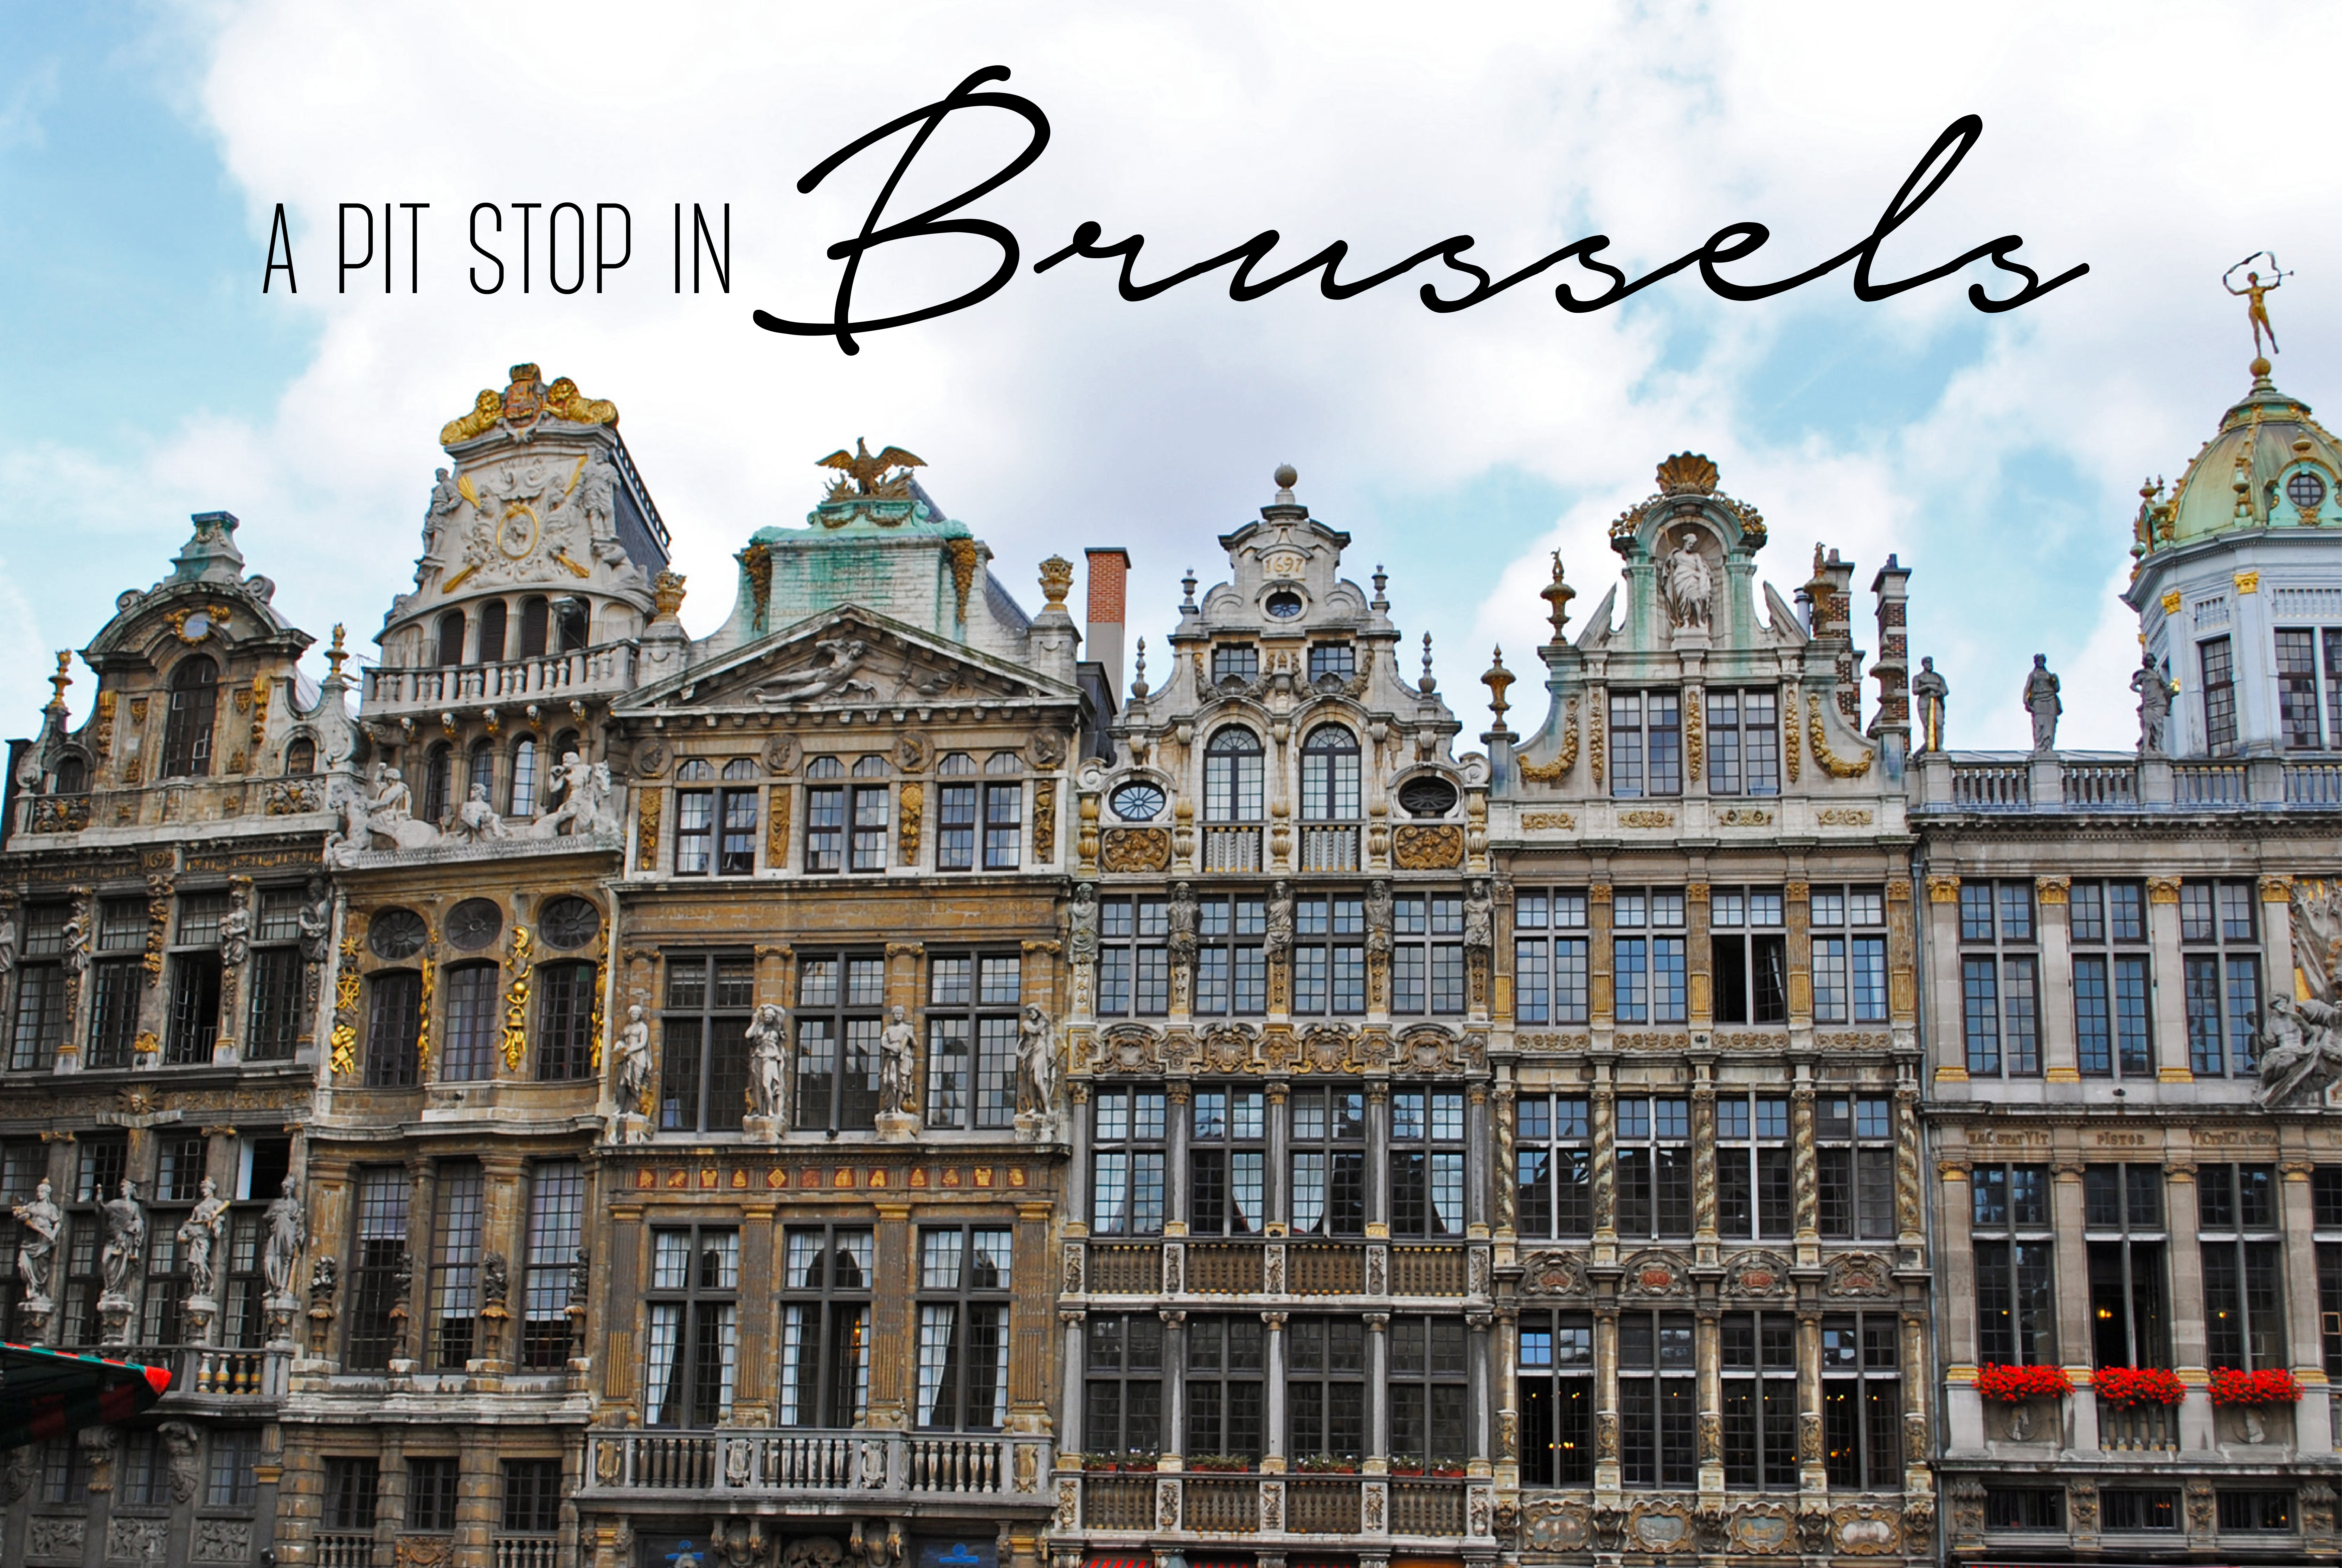 A Pit Stop in Brussels